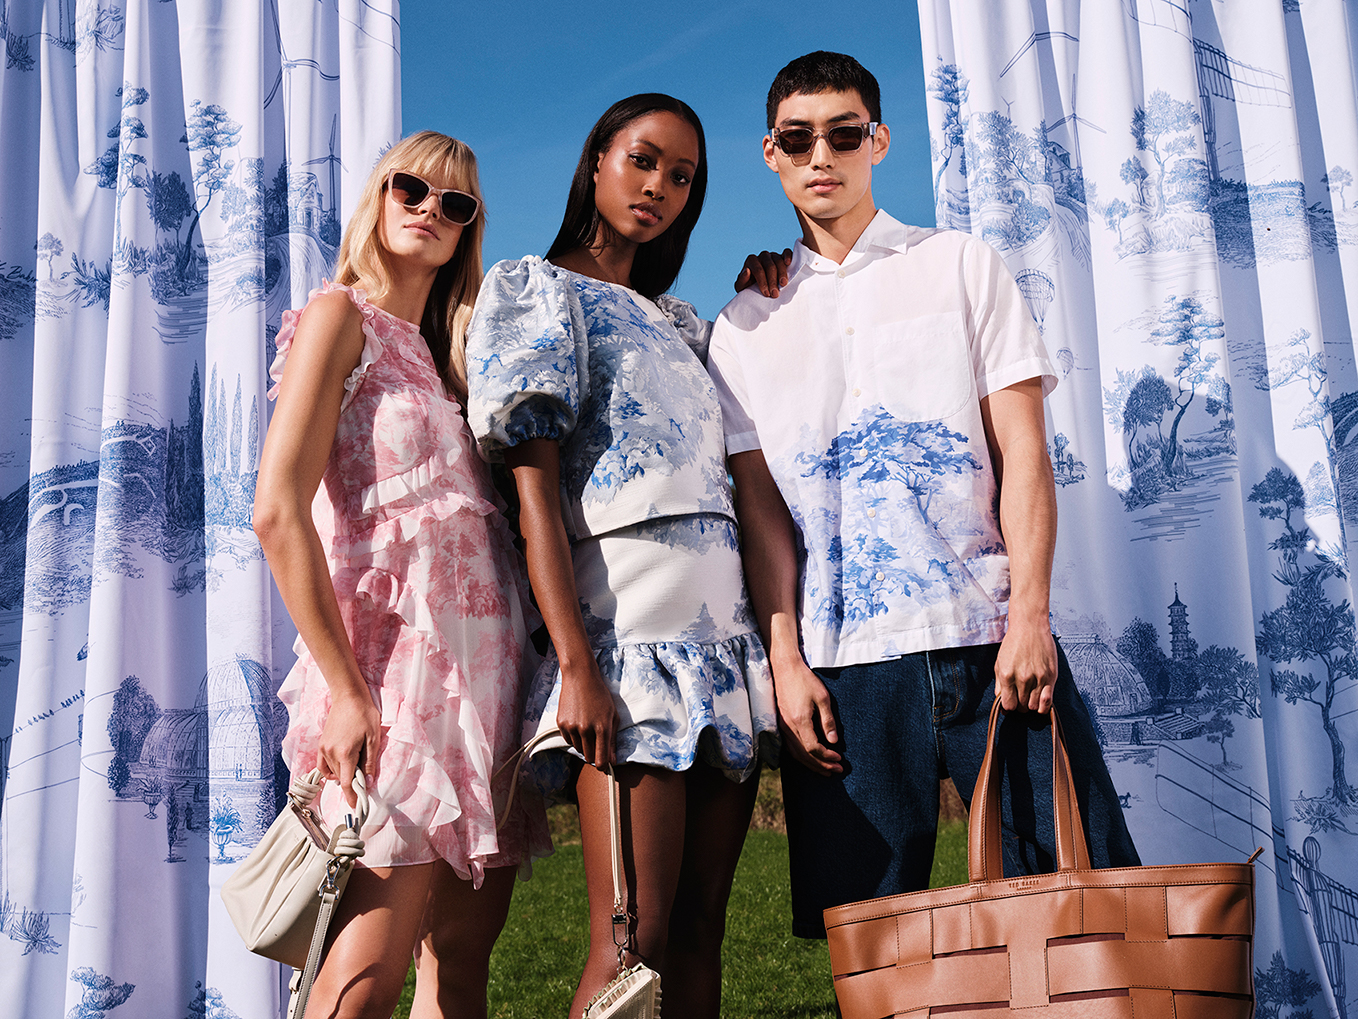 Ted baker spring summer 2022 britain's golden heritage in the green steppe